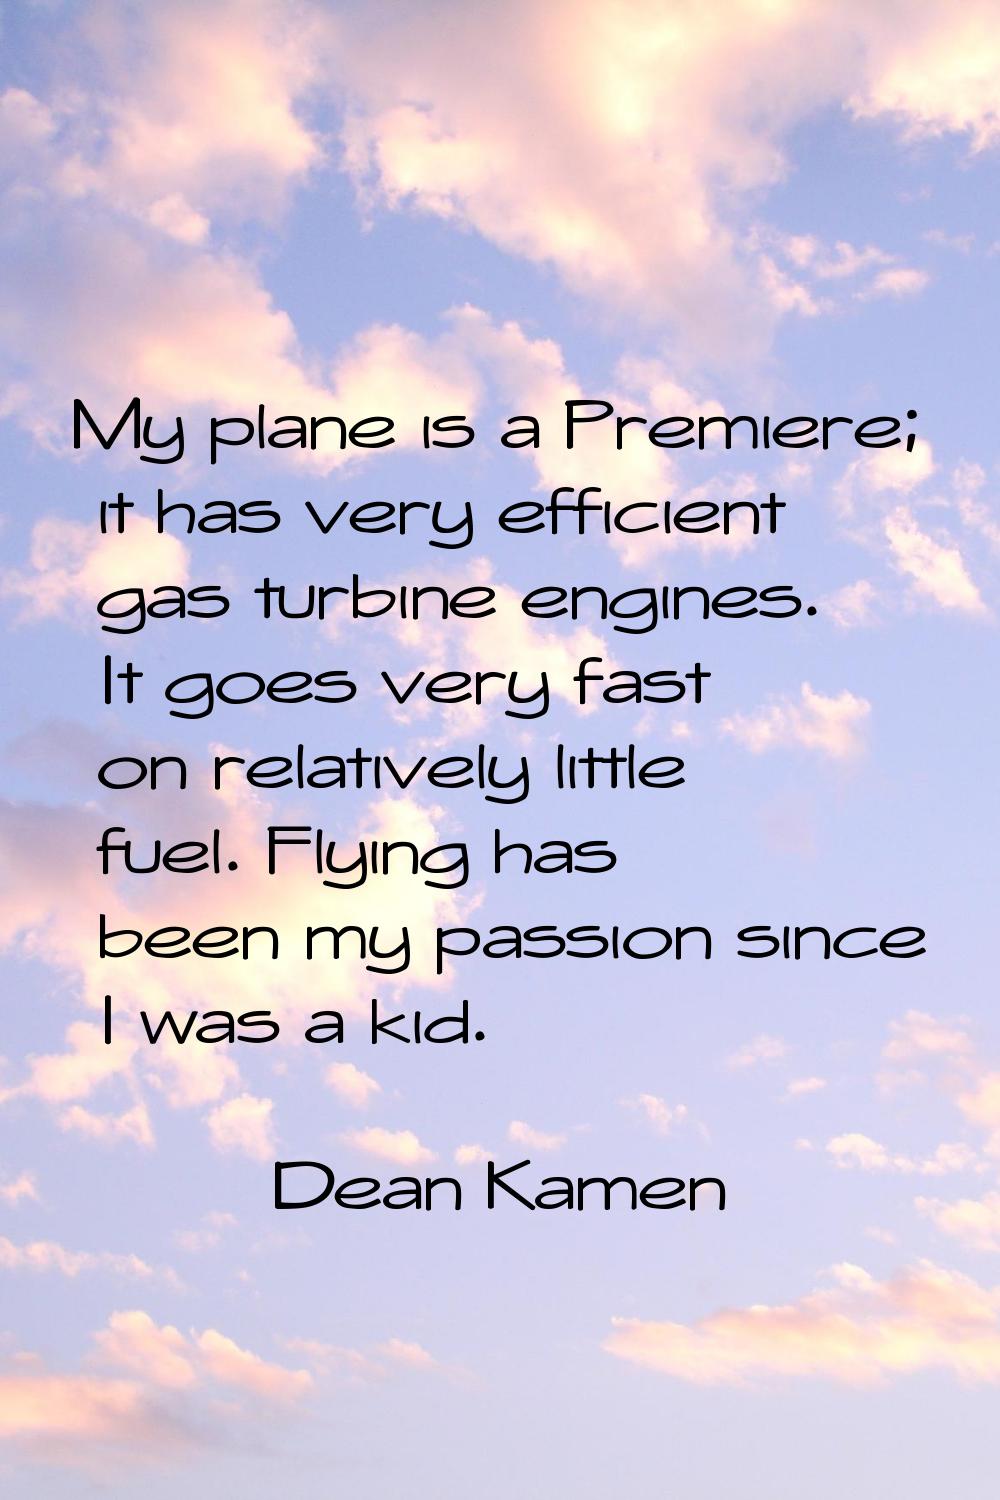 My plane is a Premiere; it has very efficient gas turbine engines. It goes very fast on relatively 